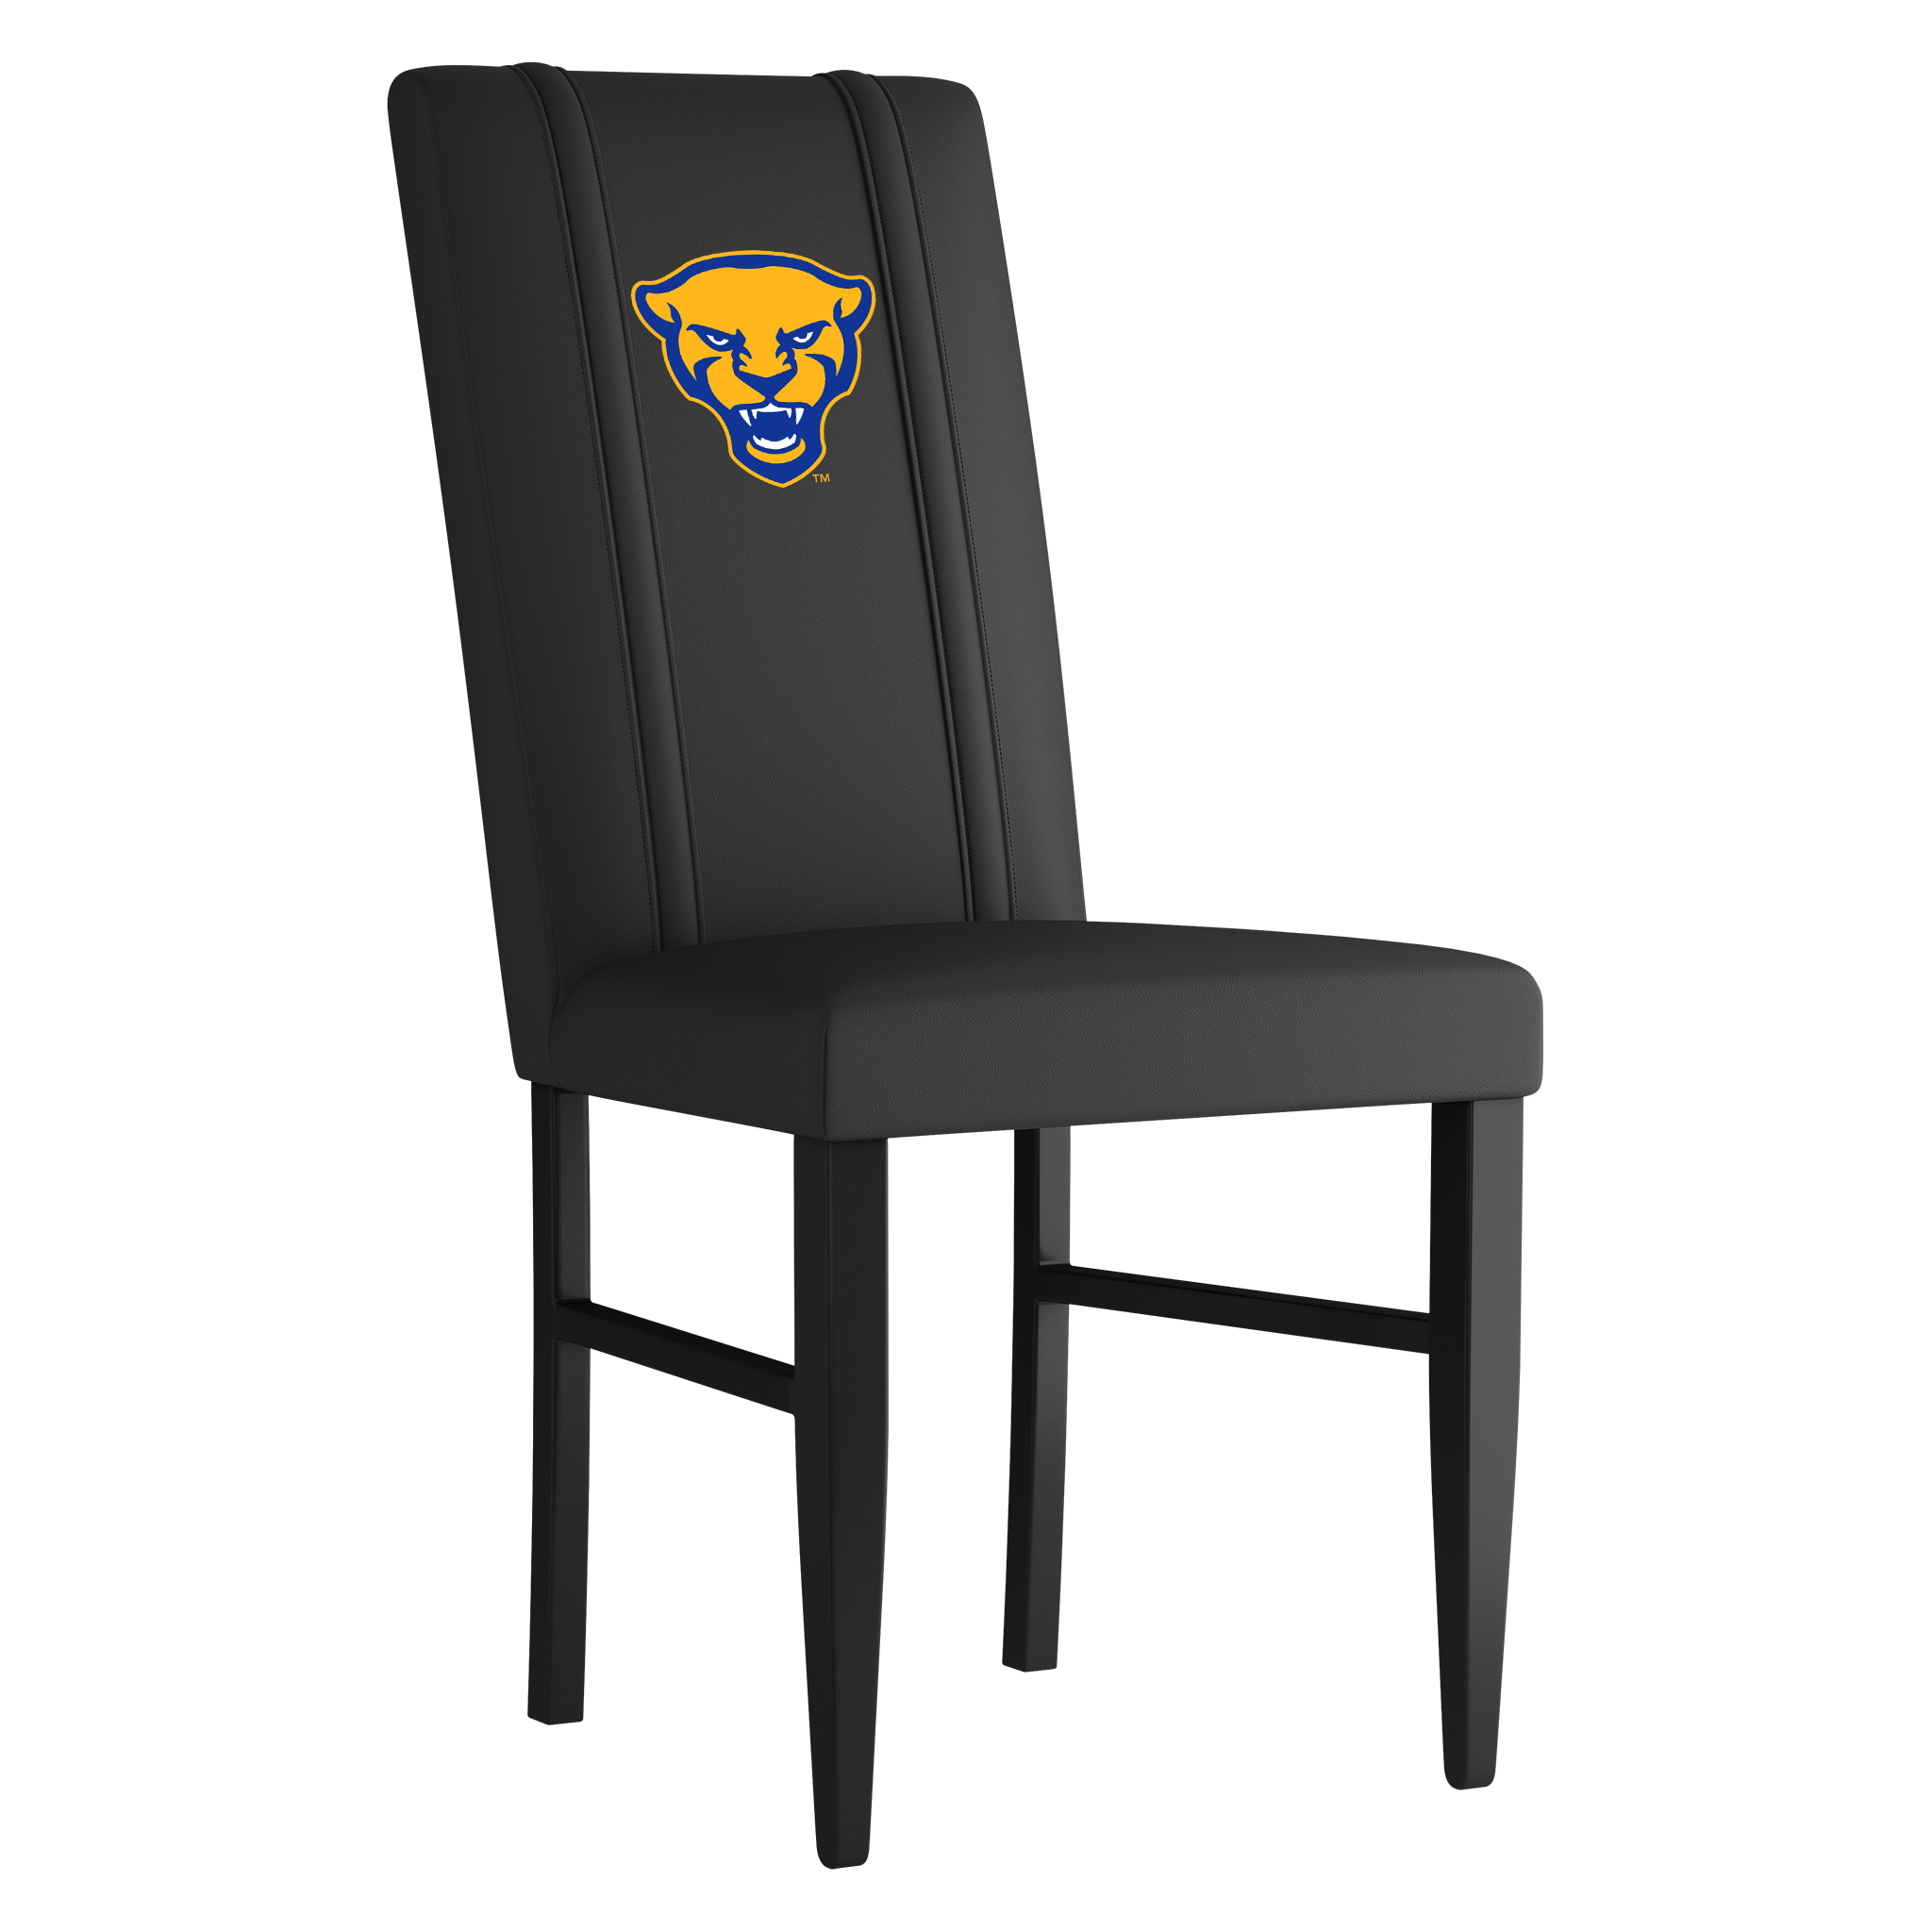 Pittsburgh Panthers Side Chair 2000 With Pittsburgh Panthers Alternate Logo